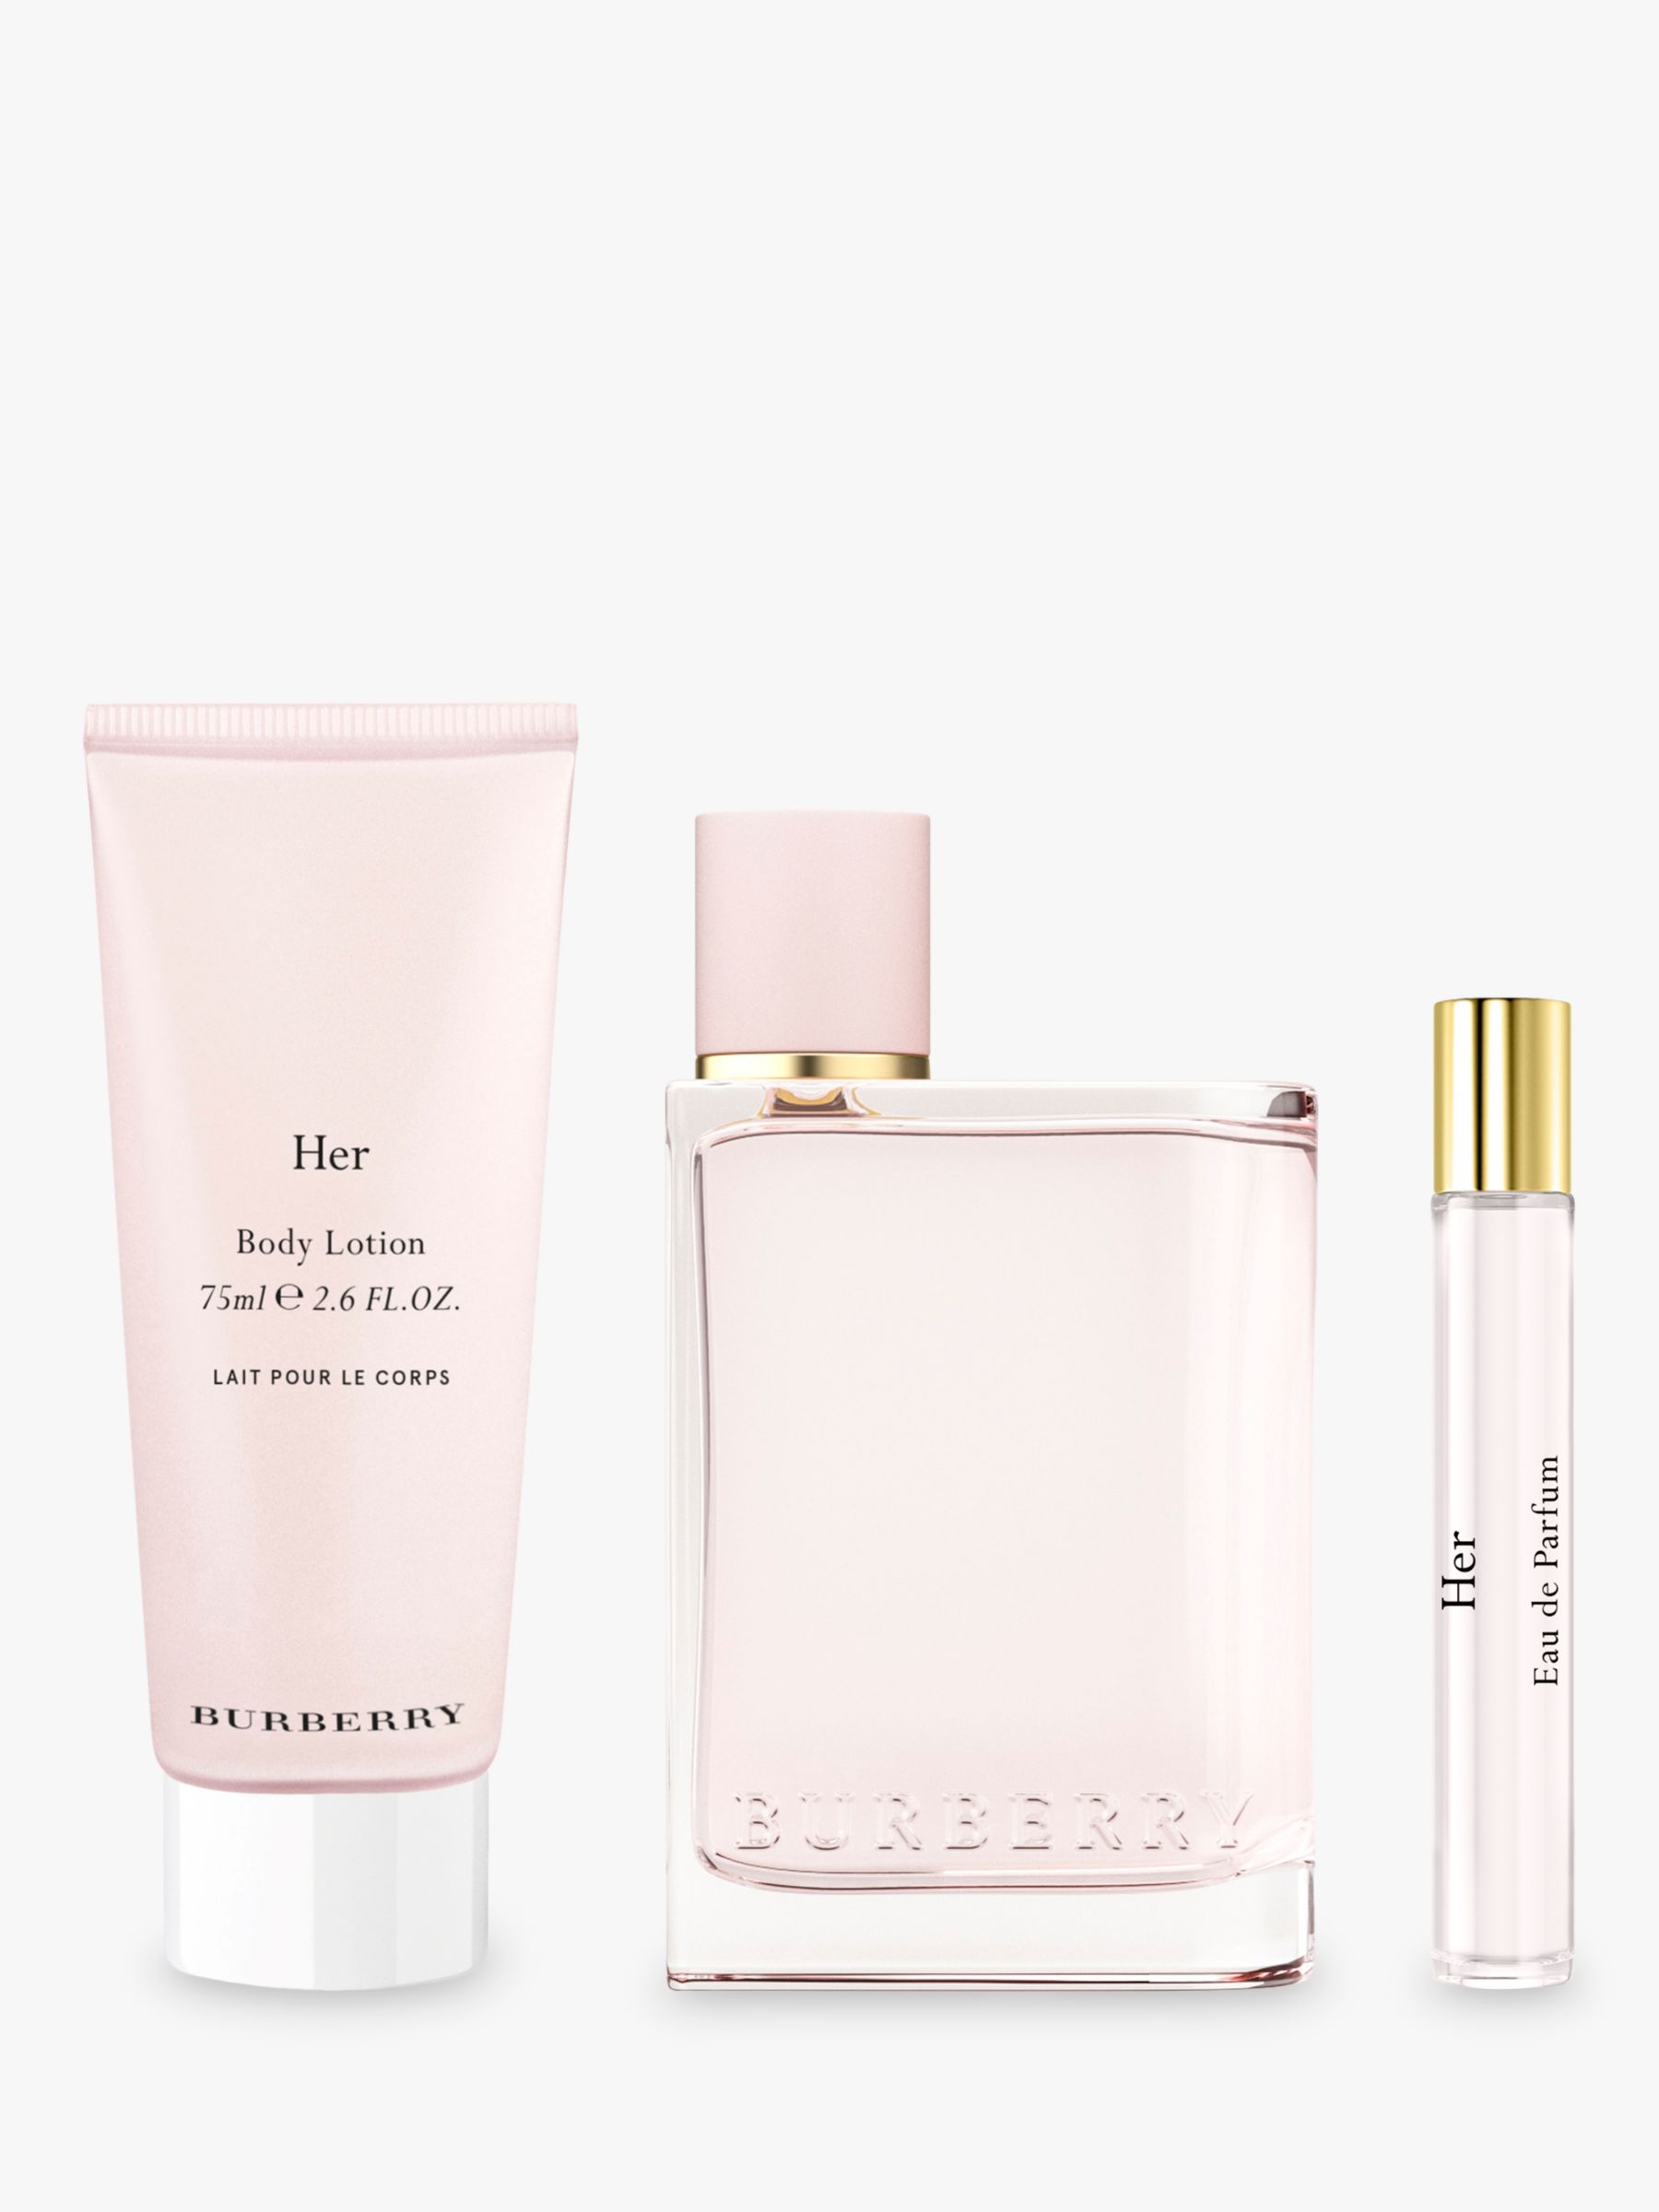 burberry perfume gift set for her